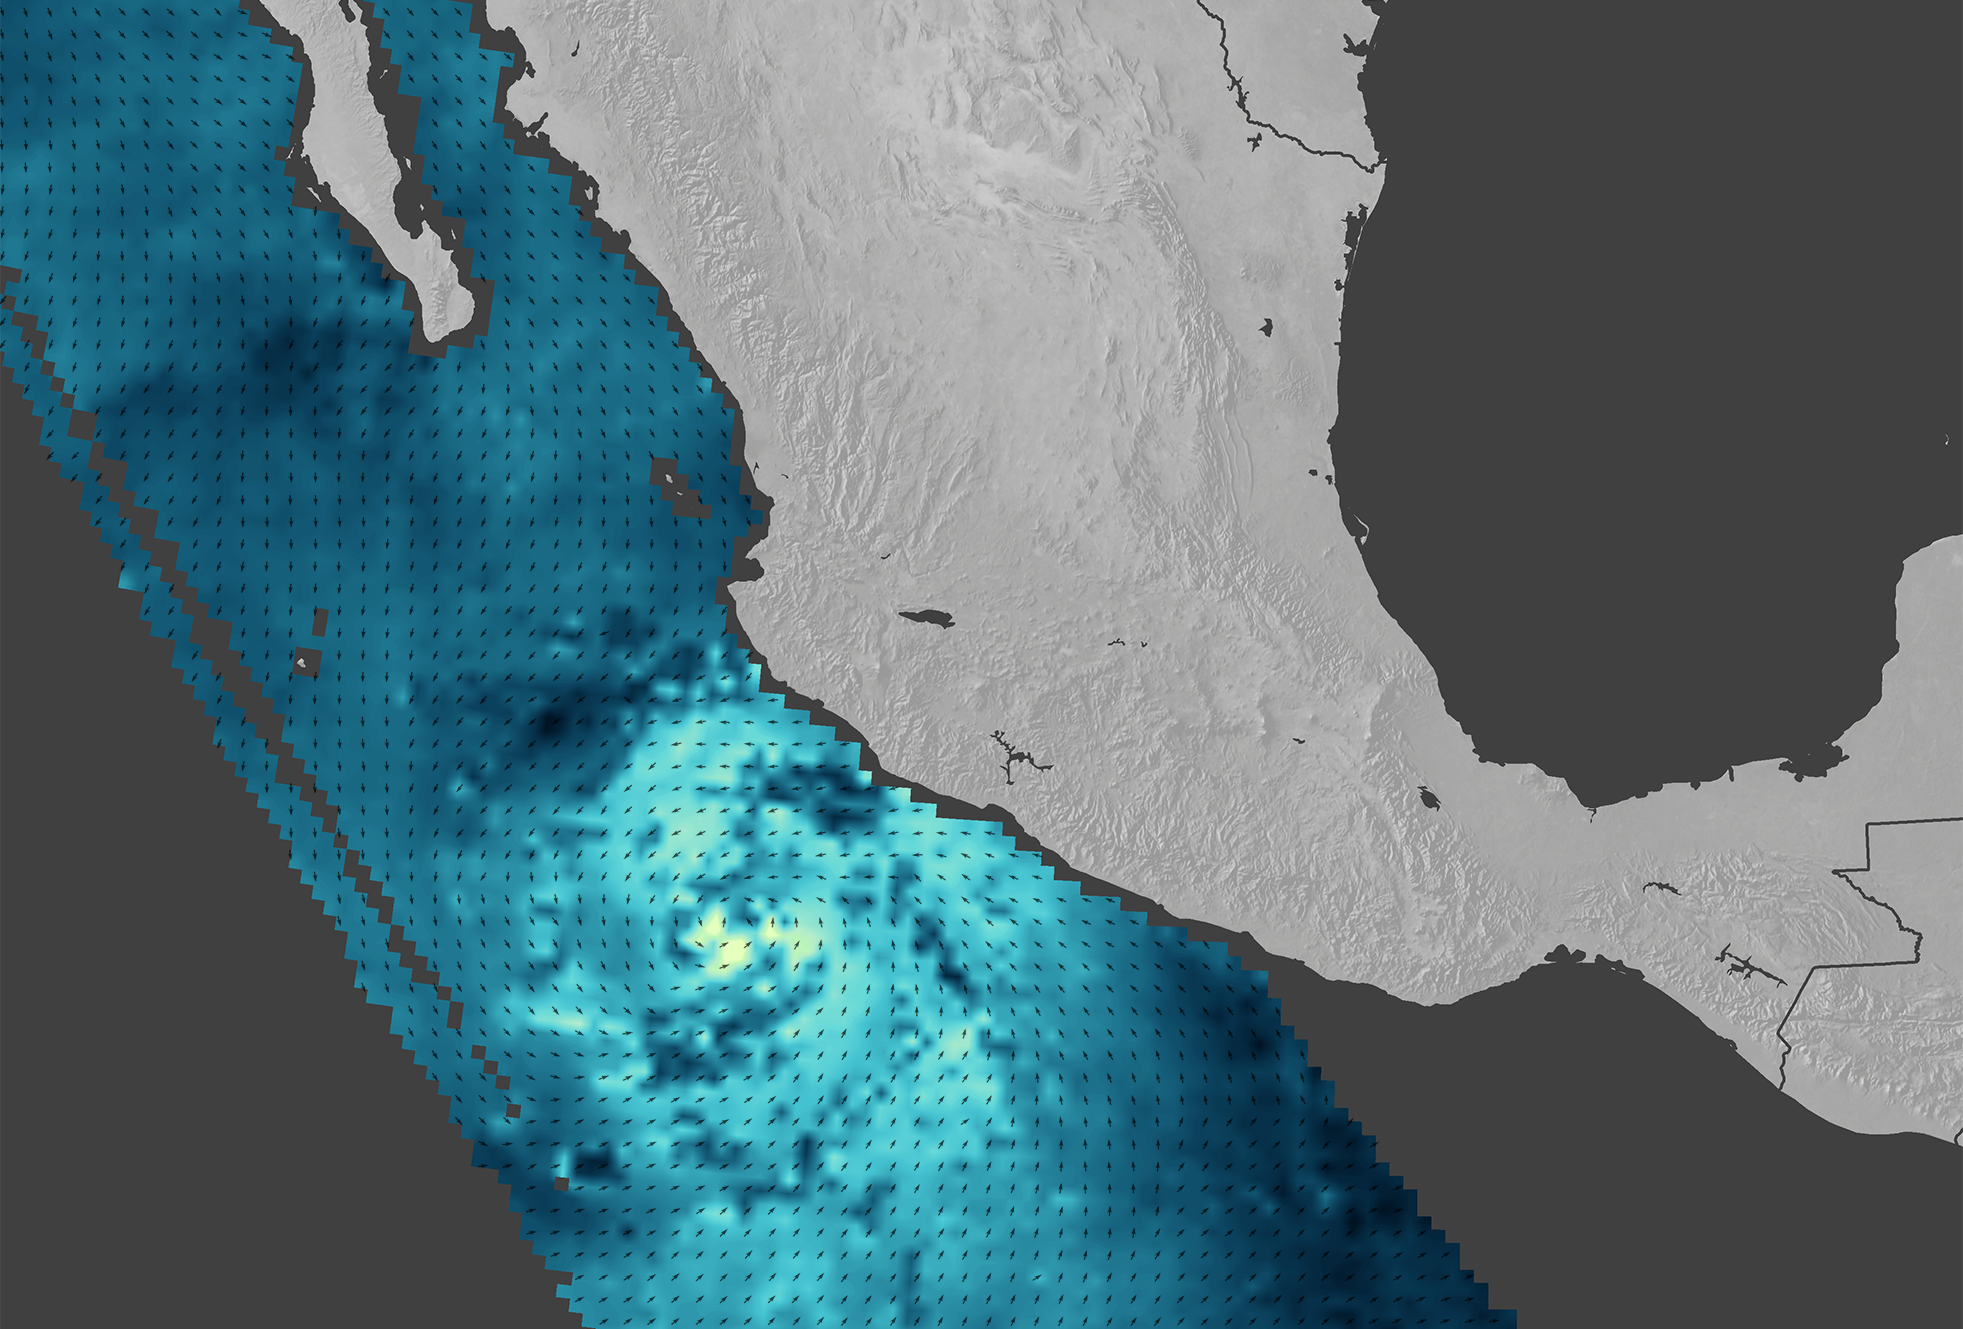 Hurricane Patricia Nears Mexico - related image preview